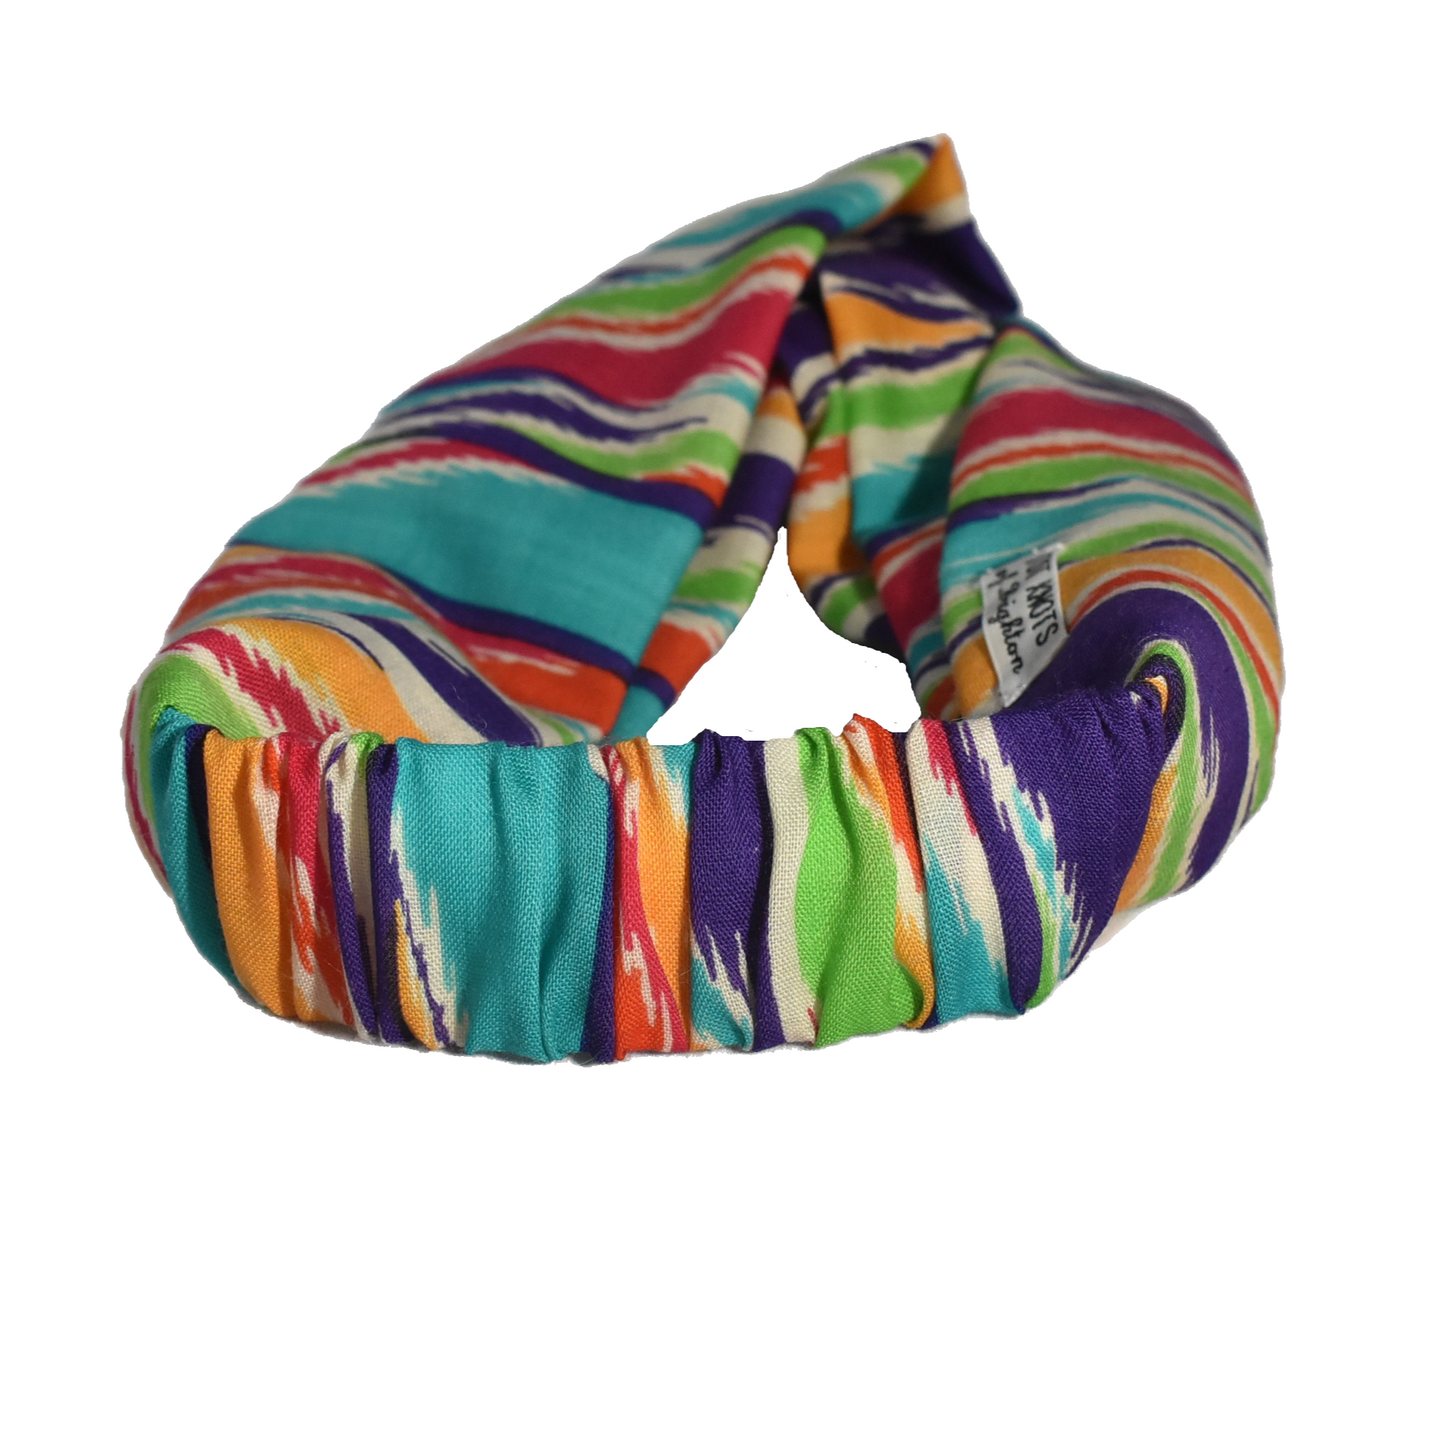 Twisted Turban hairband - Vintage Liberty of London Bright Multicolour Ikat Graphic in Varuna wool